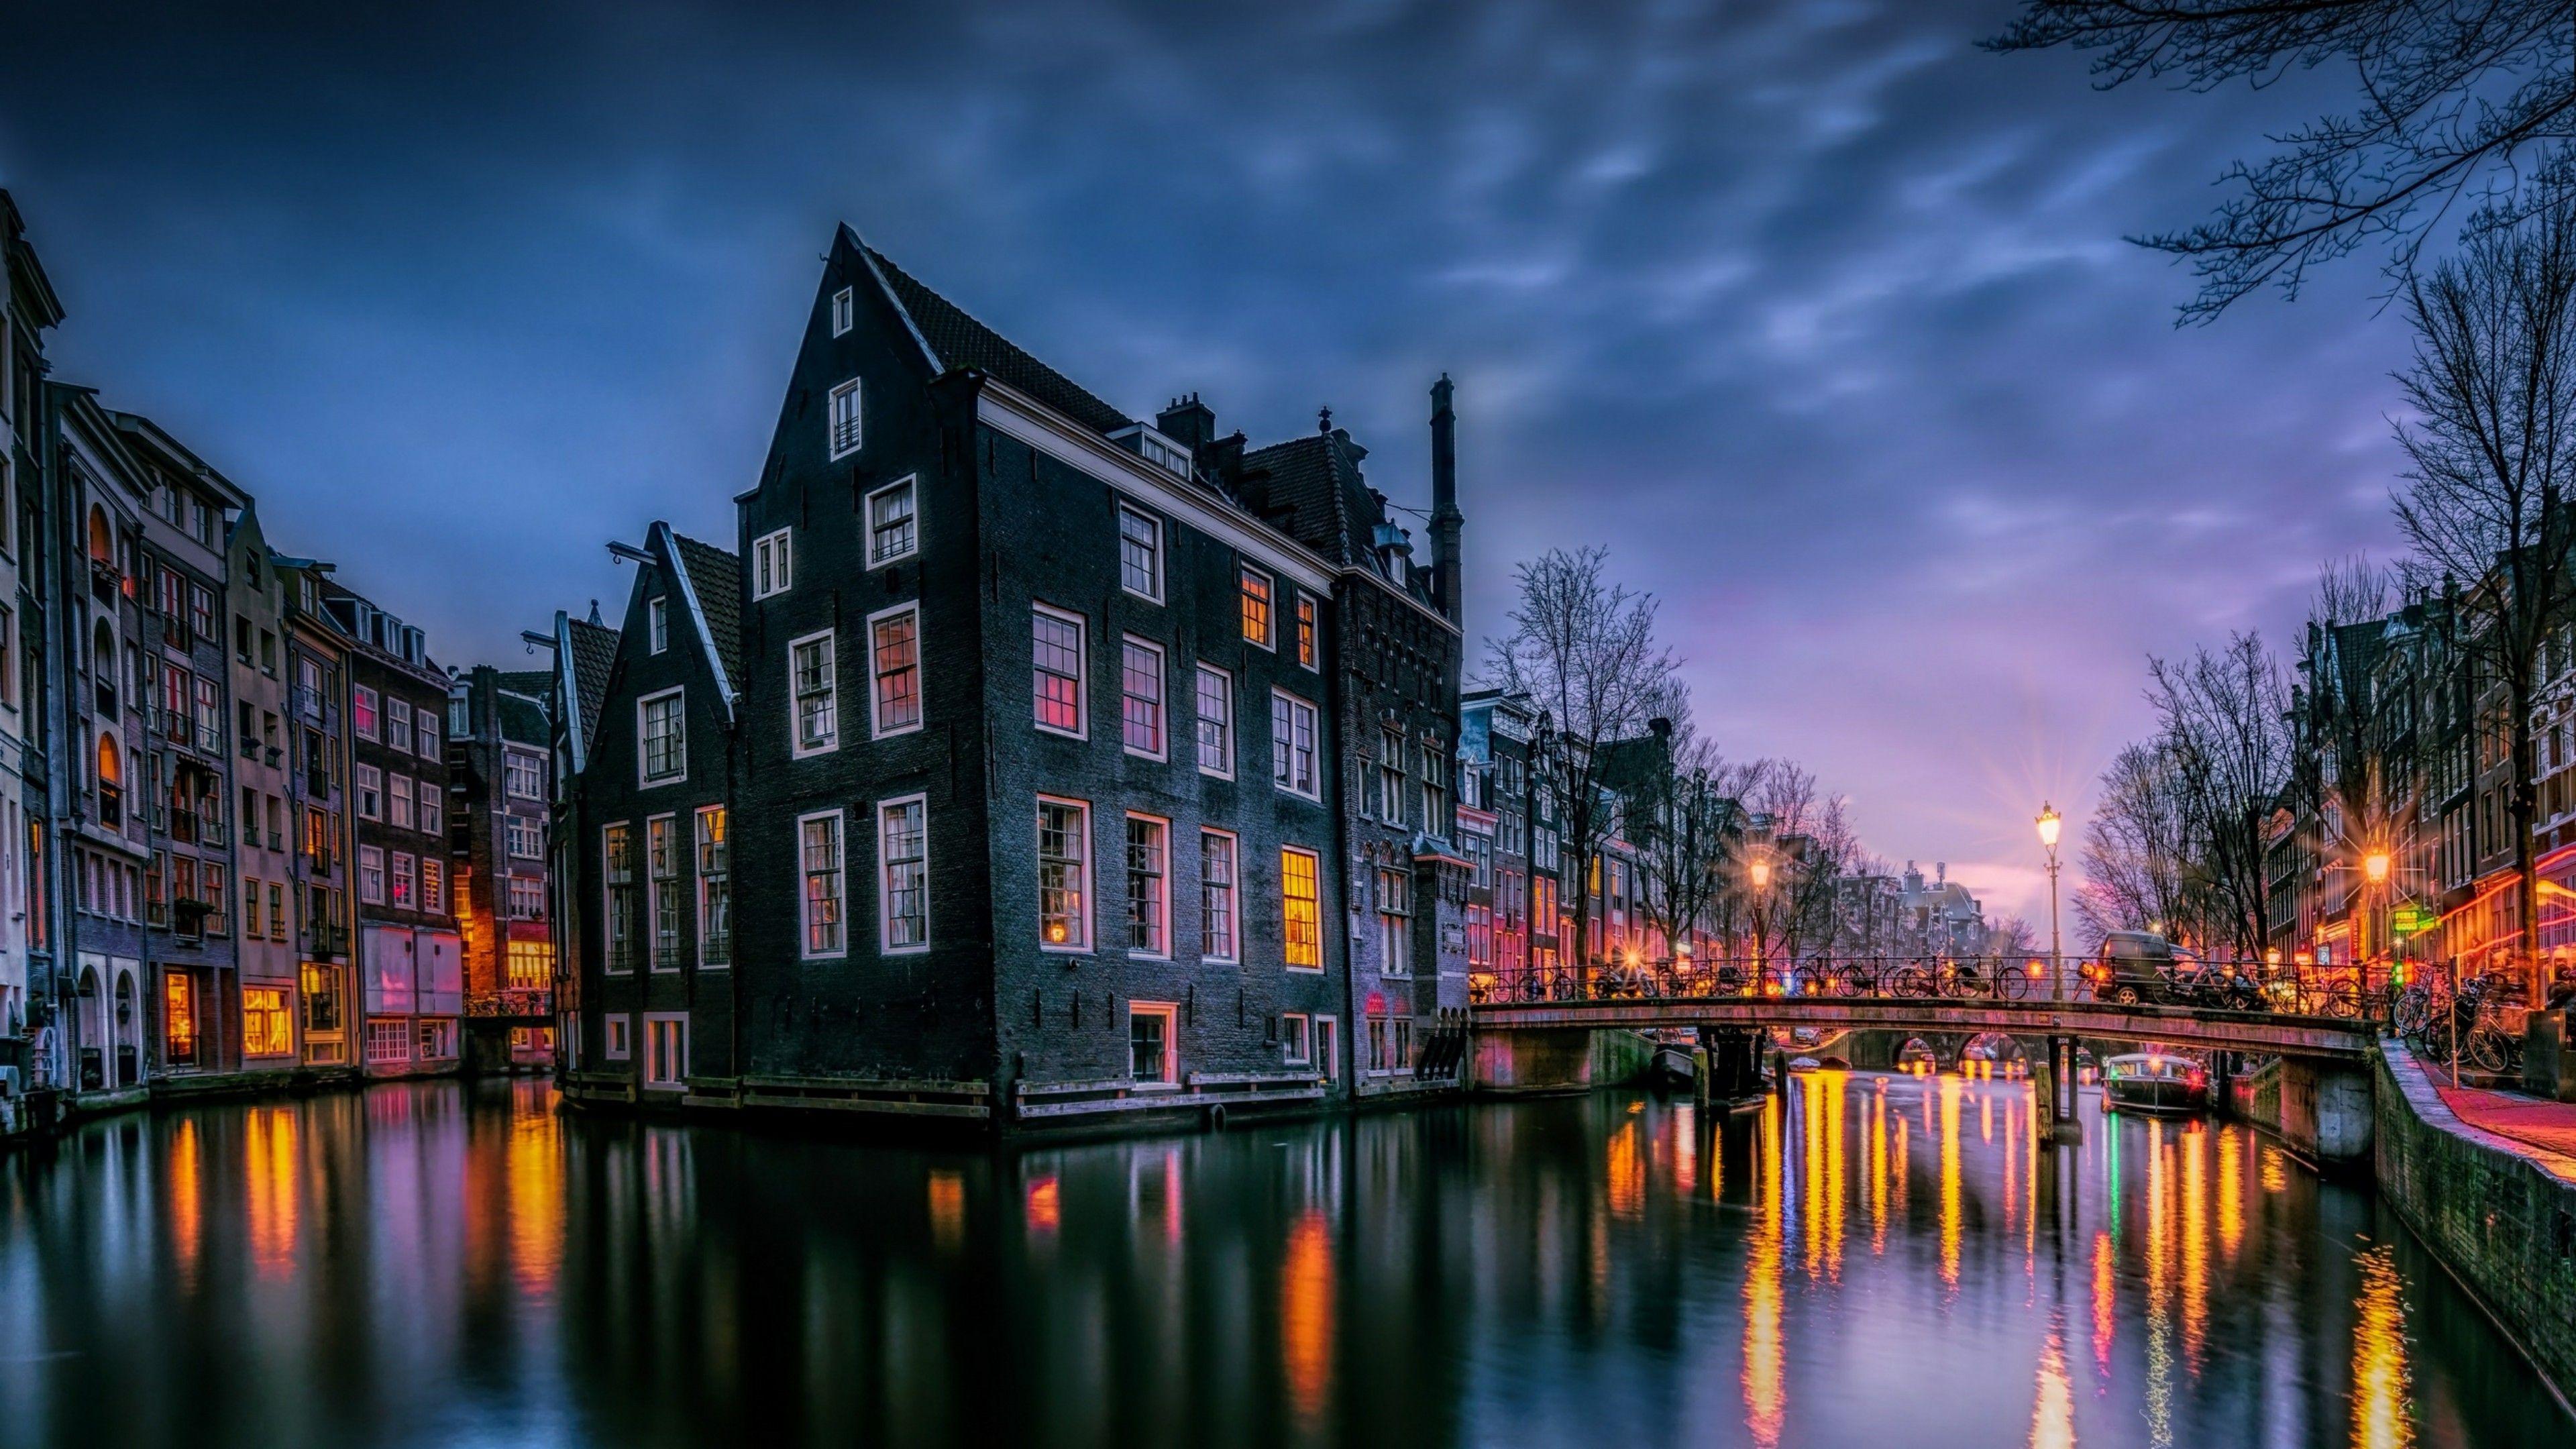 Amsterdam 4k Wallpapers - Top Free Amsterdam 4k Backgrounds ...